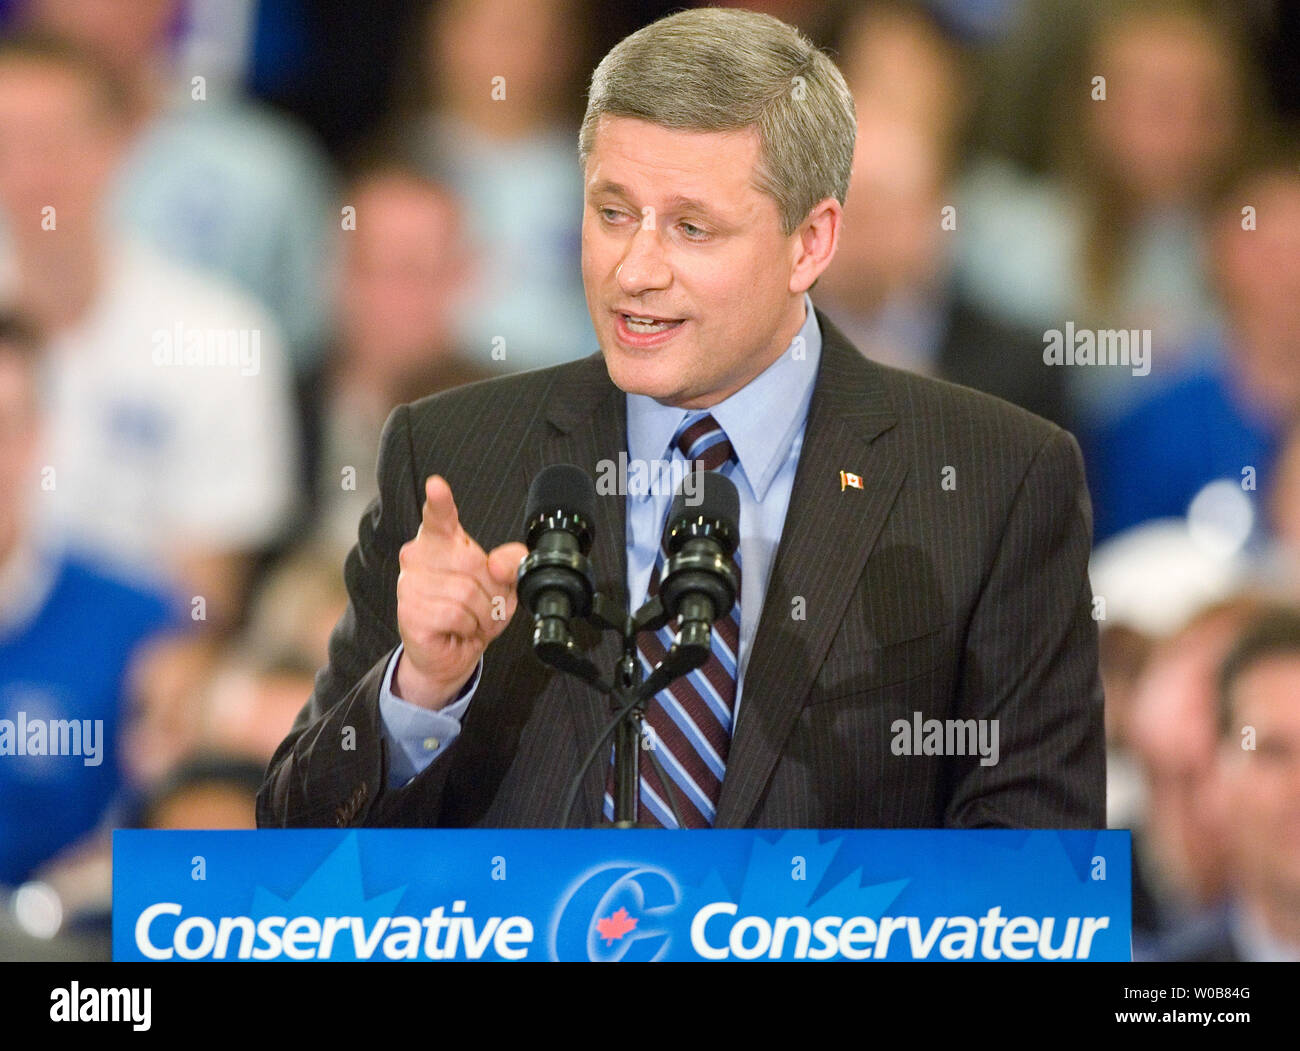 Federal Conservative leader Prime Minister Stephen Harper speaks to supporters in Vancouver, British Columbia, during a federal election campaign stop October 8, 2008.   (UPI Photo/Heinz Ruckemann) Stock Photo